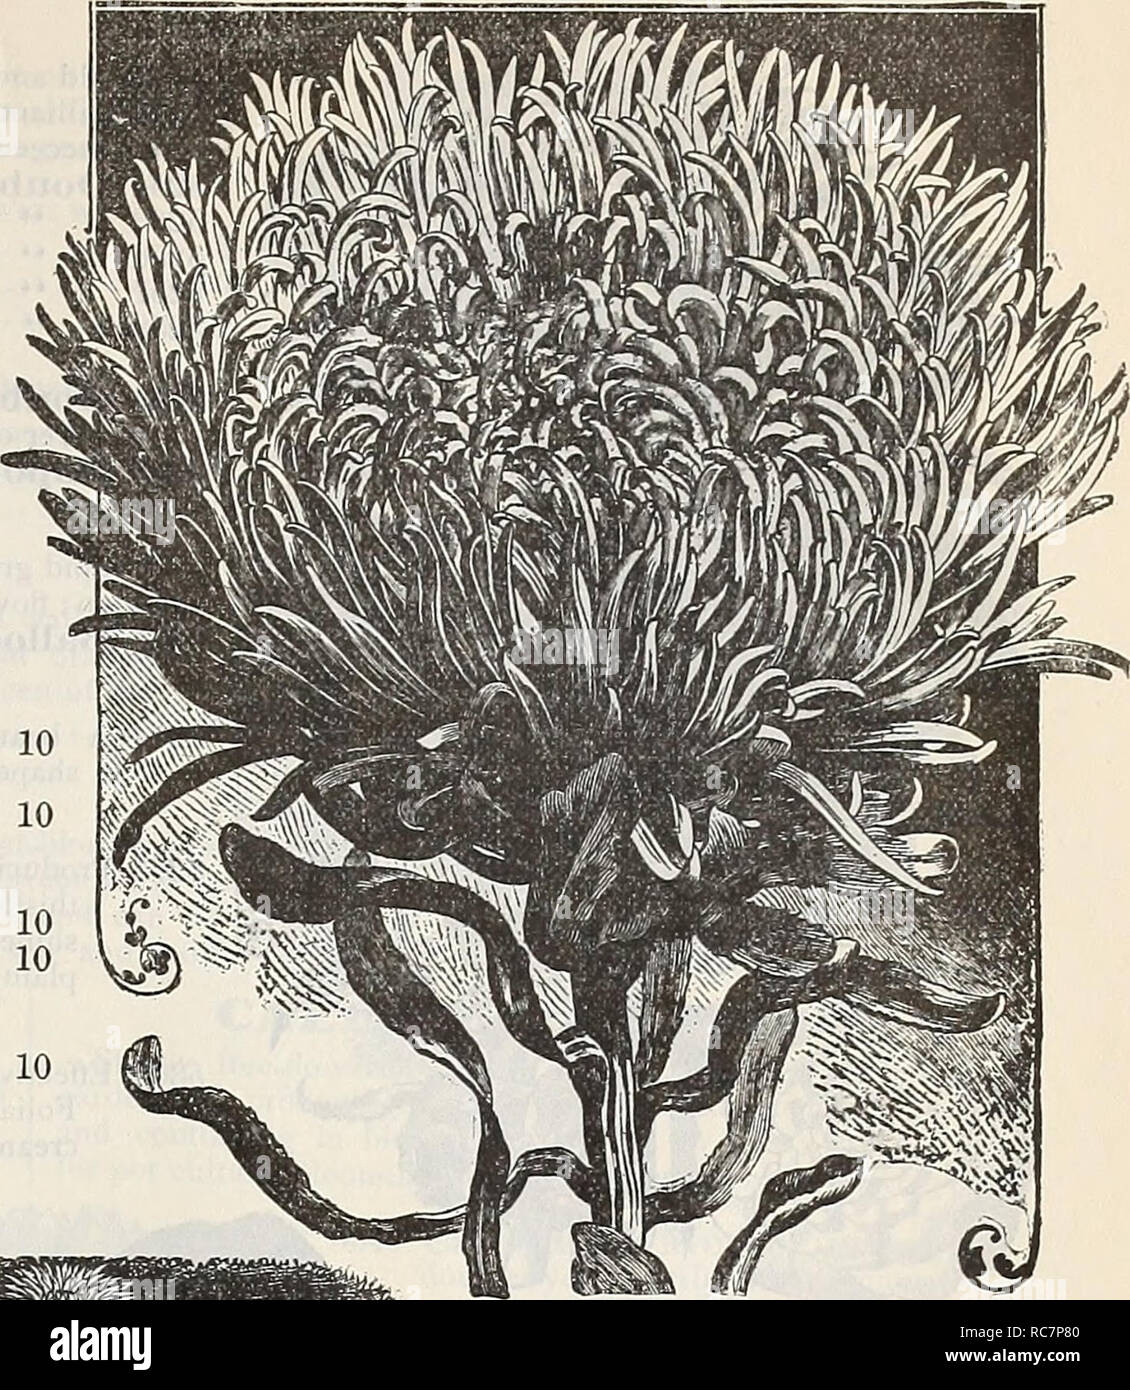 . Dreer's garden calendar : 1898. Seeds Catalogs; Nursery stock Catalogs; Gardening Catalogs; Flowers Seeds Catalogs; Vegetables Seeds Catalogs. DREER'S RELIABLE FLOWER SEEDS. 59 VARIOUS ASTERS. p,,p«, 5238 Climax, or Tree. A new Aster of the I'asony flowered type, but shows a great improvement over that popular son. The phiiit grows about 2 feet high, as regularly branched as a pine tree, flowers of immense size; dazzling while ; very double. 15 5173 Cocardeau, or Crown. Showy flowers, very doid)le, with white centres bordered vviih bright rich colors; mixed colors ; 1.} feet 10 5171 Dwarf Py Stock Photo